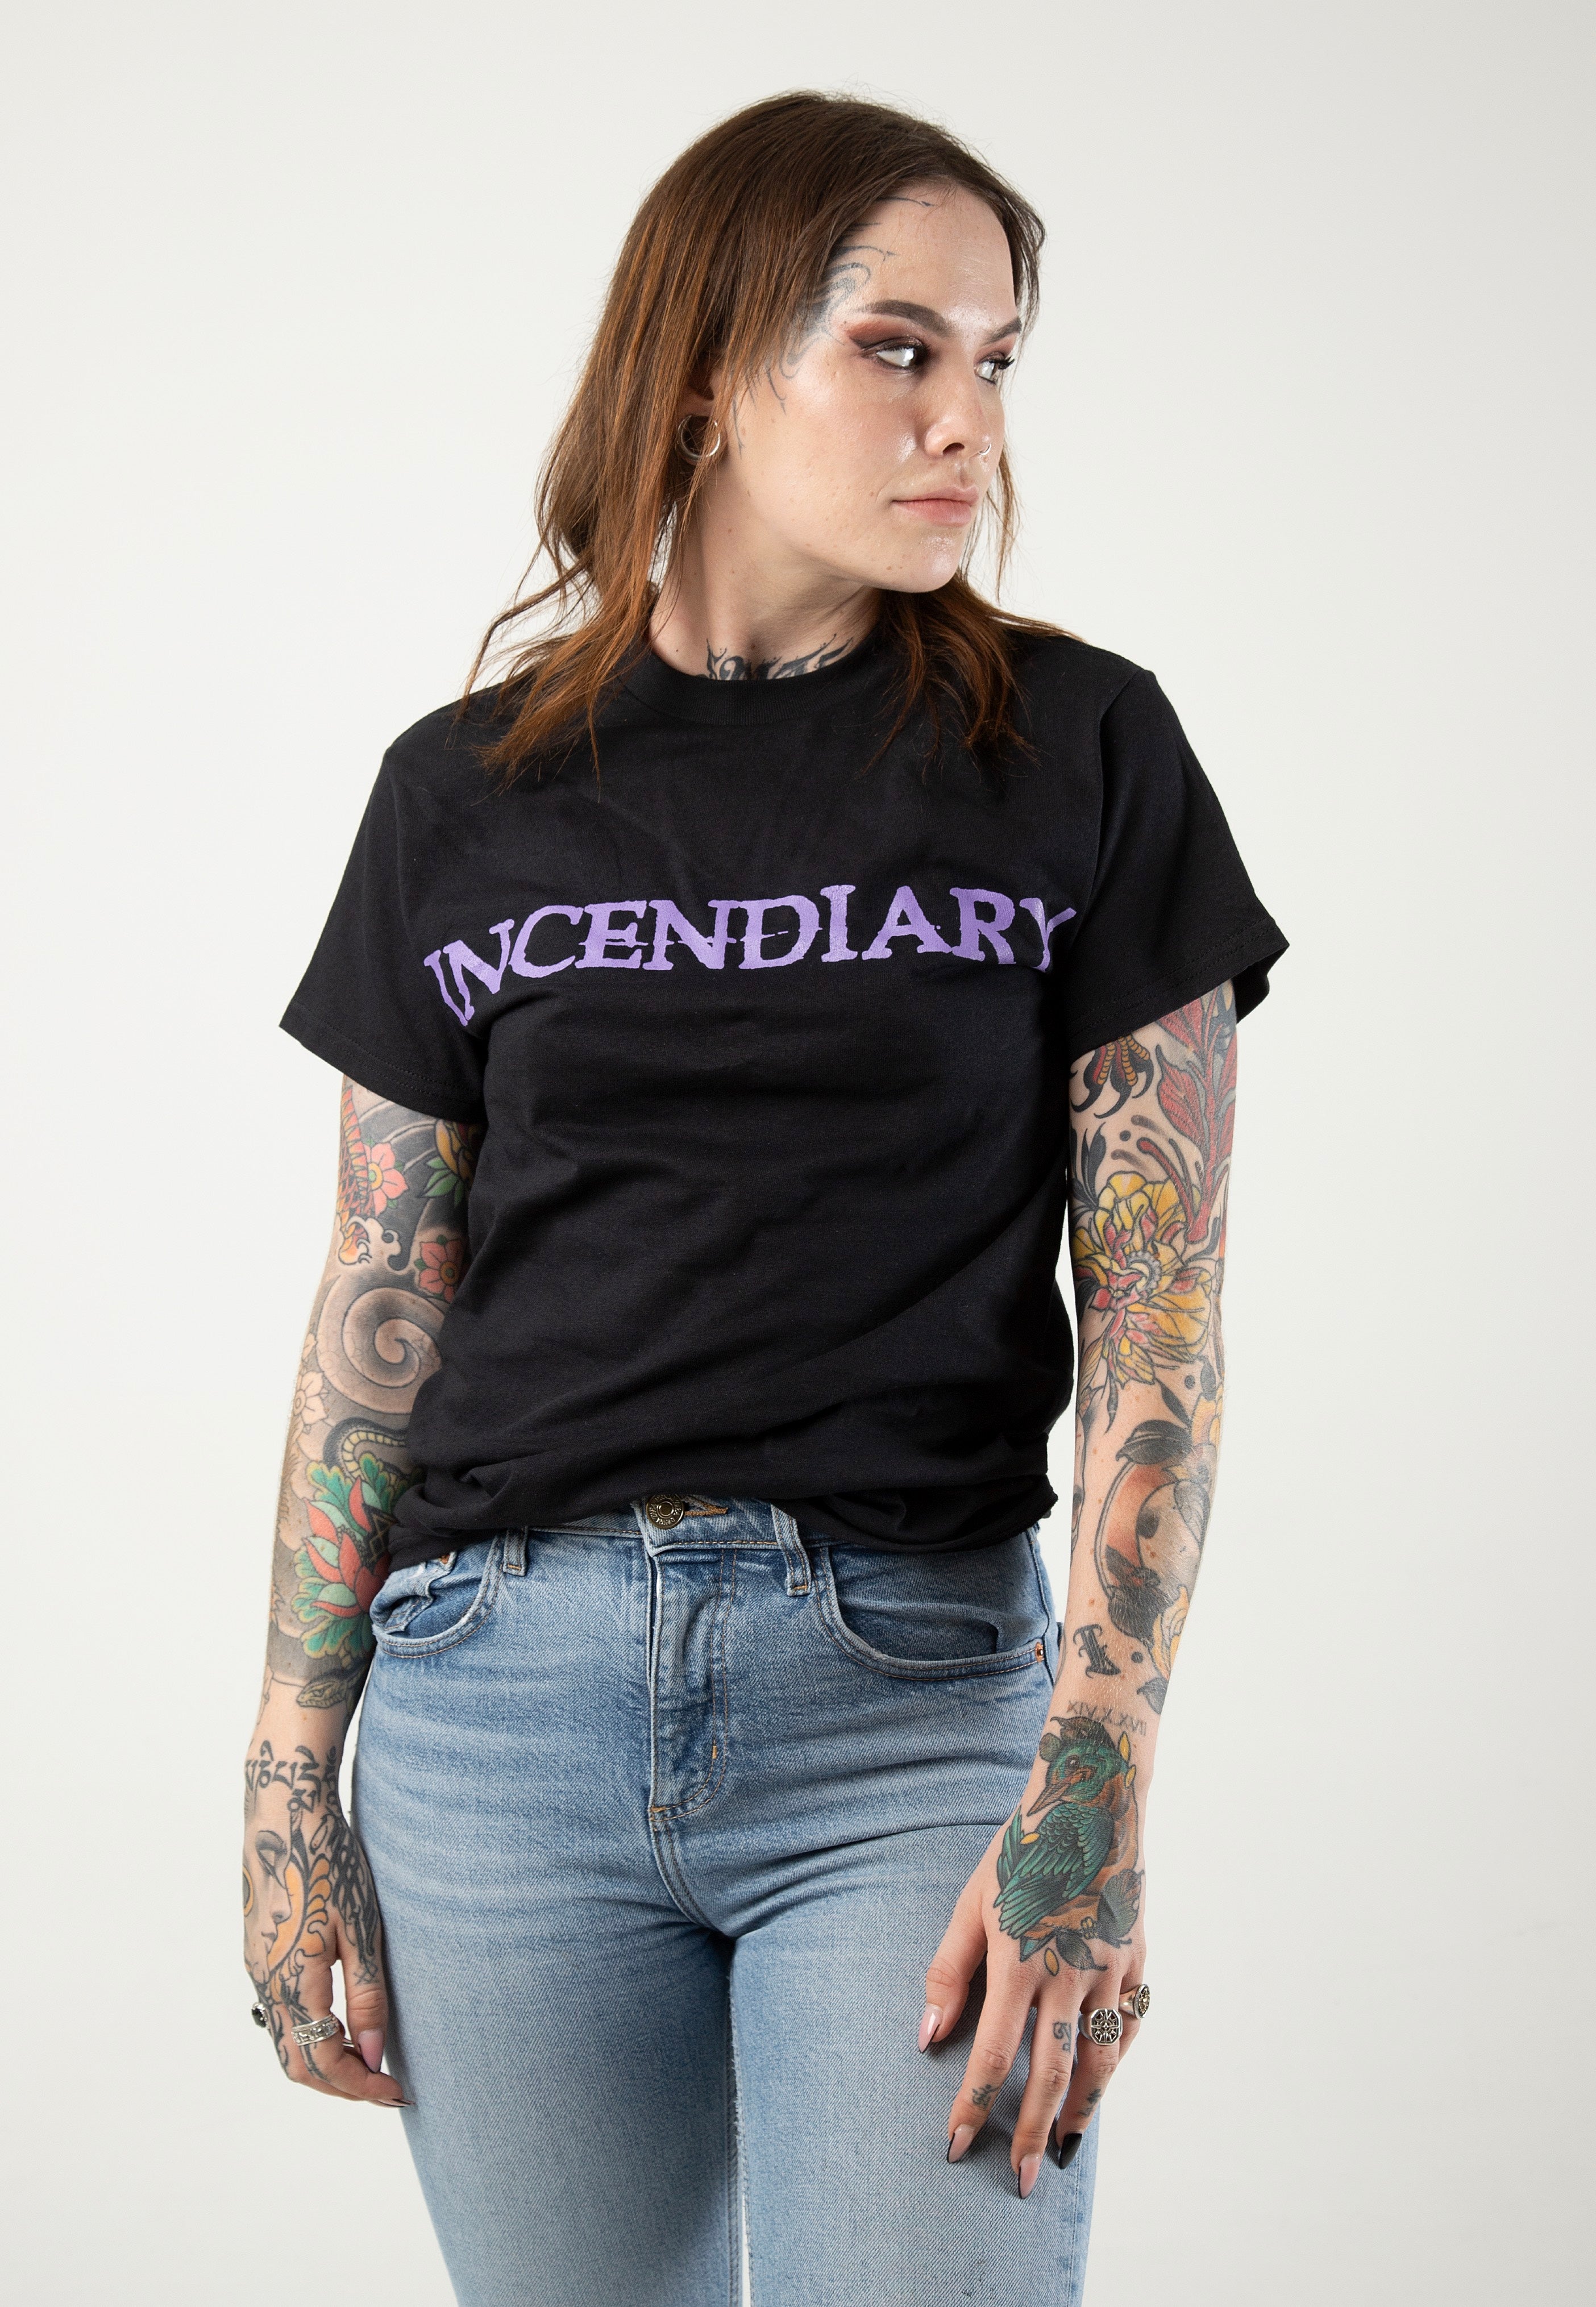 Incendiary - Product Of New York - T-Shirt | Women-Image